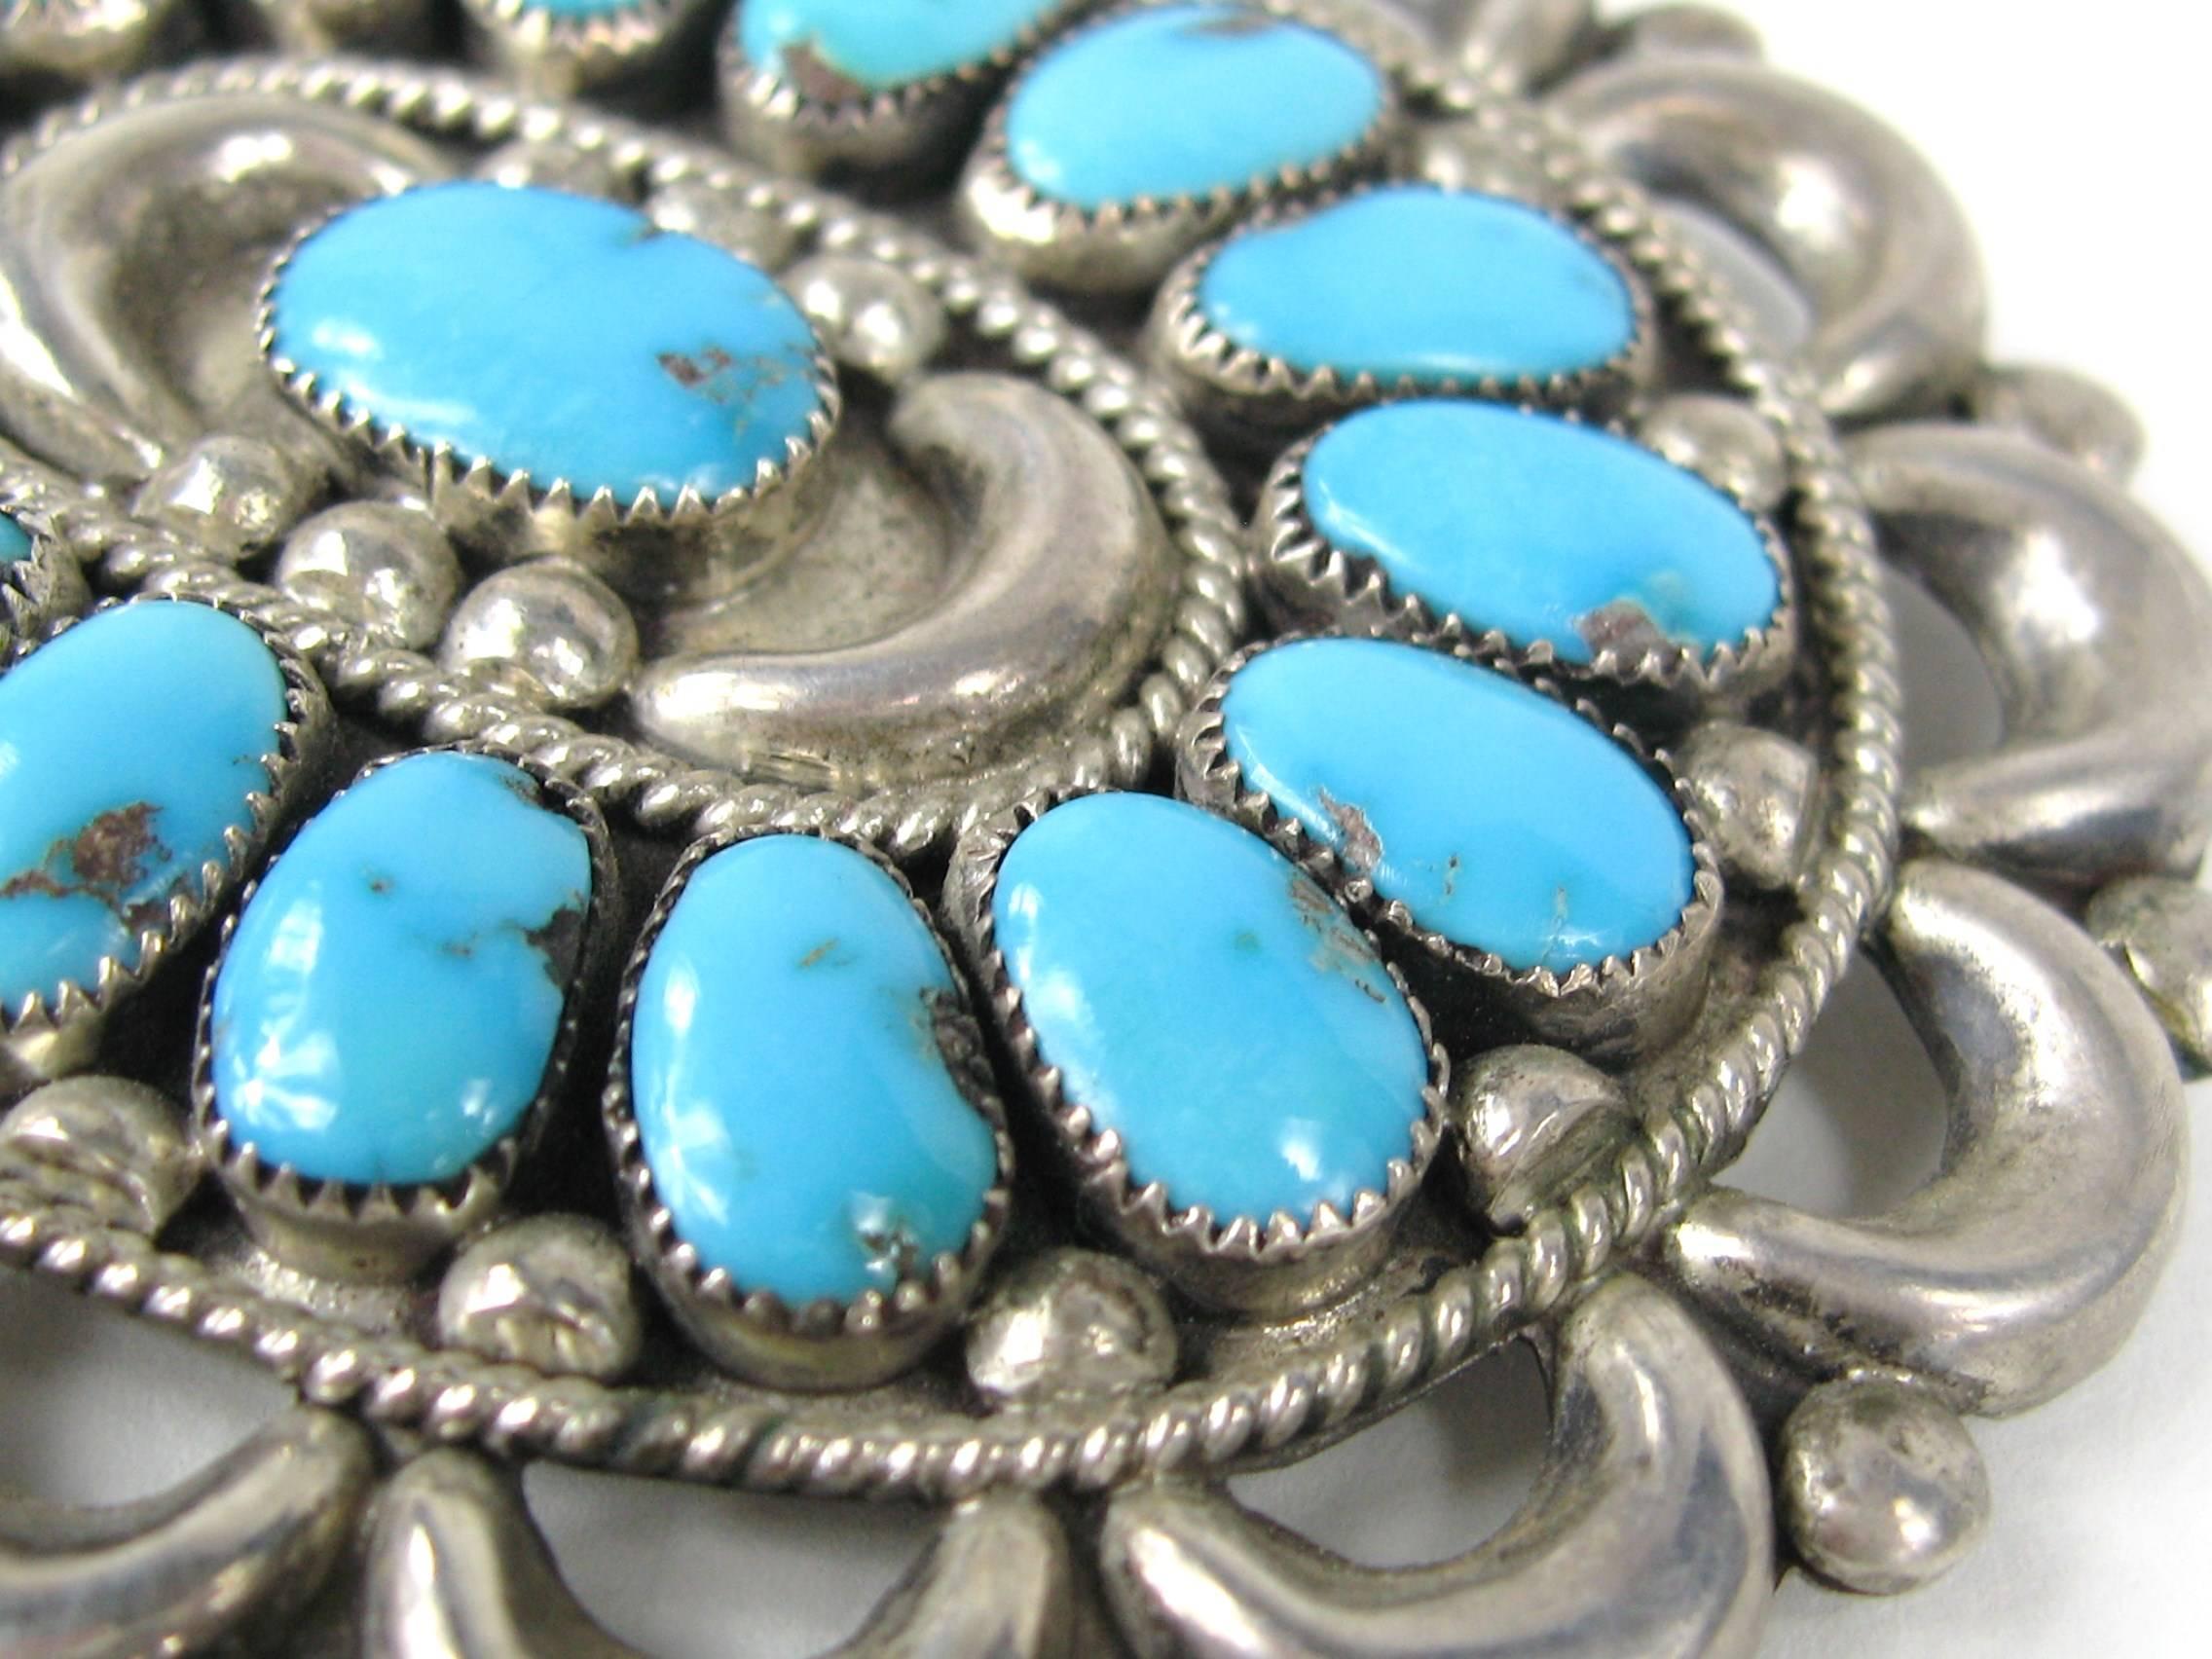 Over sized Turquoise Pin and Pendant Navajo Sterling Sterling - Hallmarked Julie O Lahi- Stunning Craftsmanship on this piece. Doubles as a pin and a pendant - Measures 2.80 in x 2.40 in . This is out of a massive collection of Hopi, Zuni, Navajo,